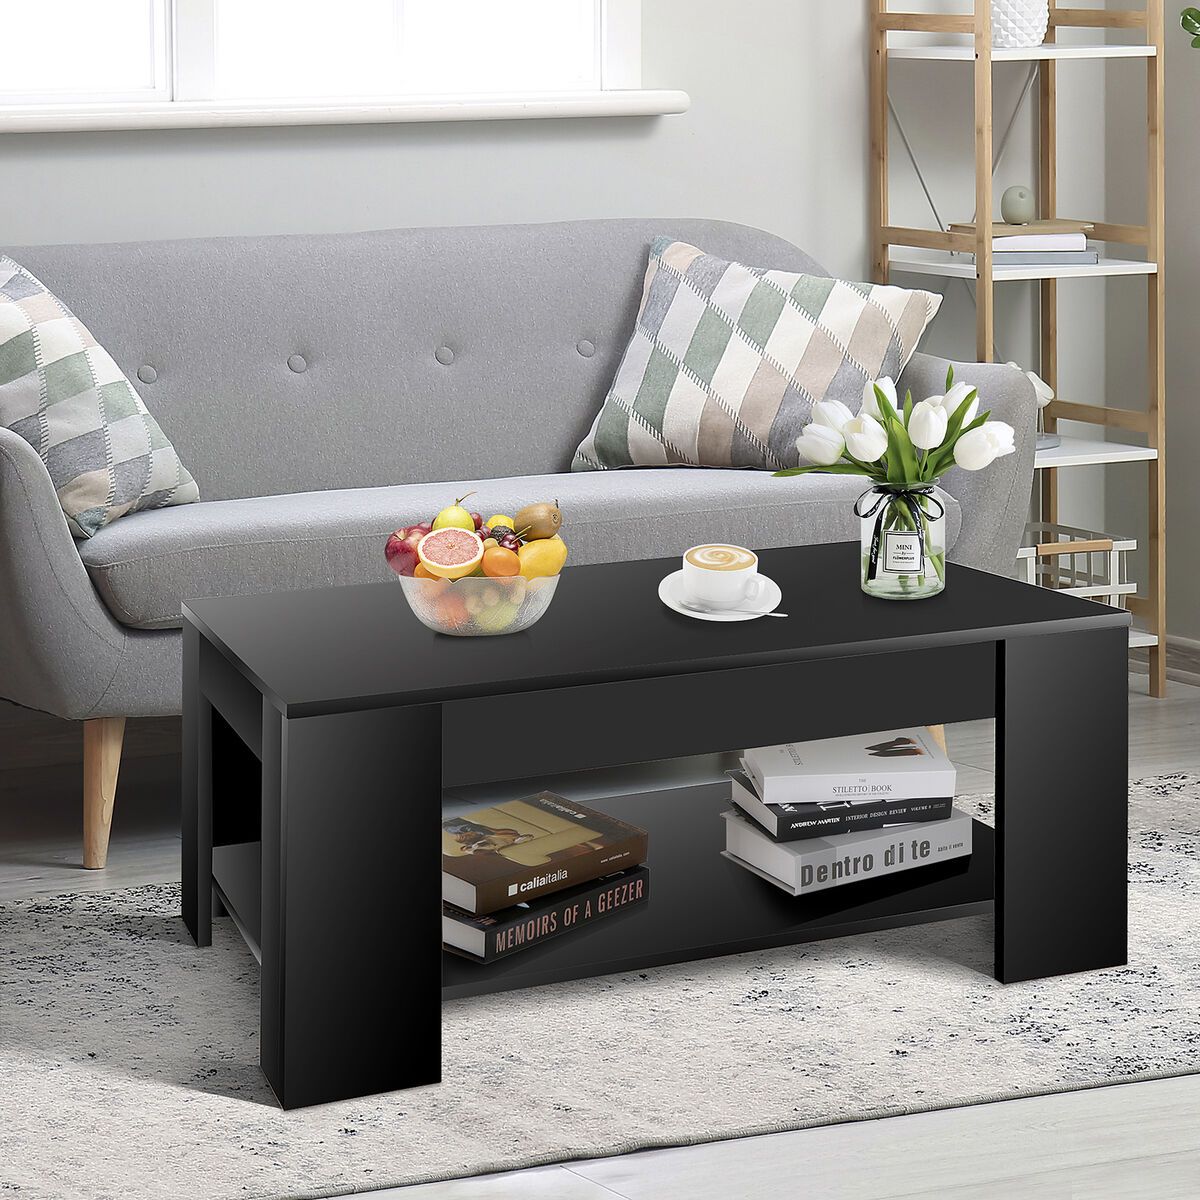 Lift Top Coffee Table Hidden Compartment Storage Shelves Modern Furniture,  Black | Ebay In Modern Coffee Tables With Hidden Storage Compartments (Photo 12 of 15)